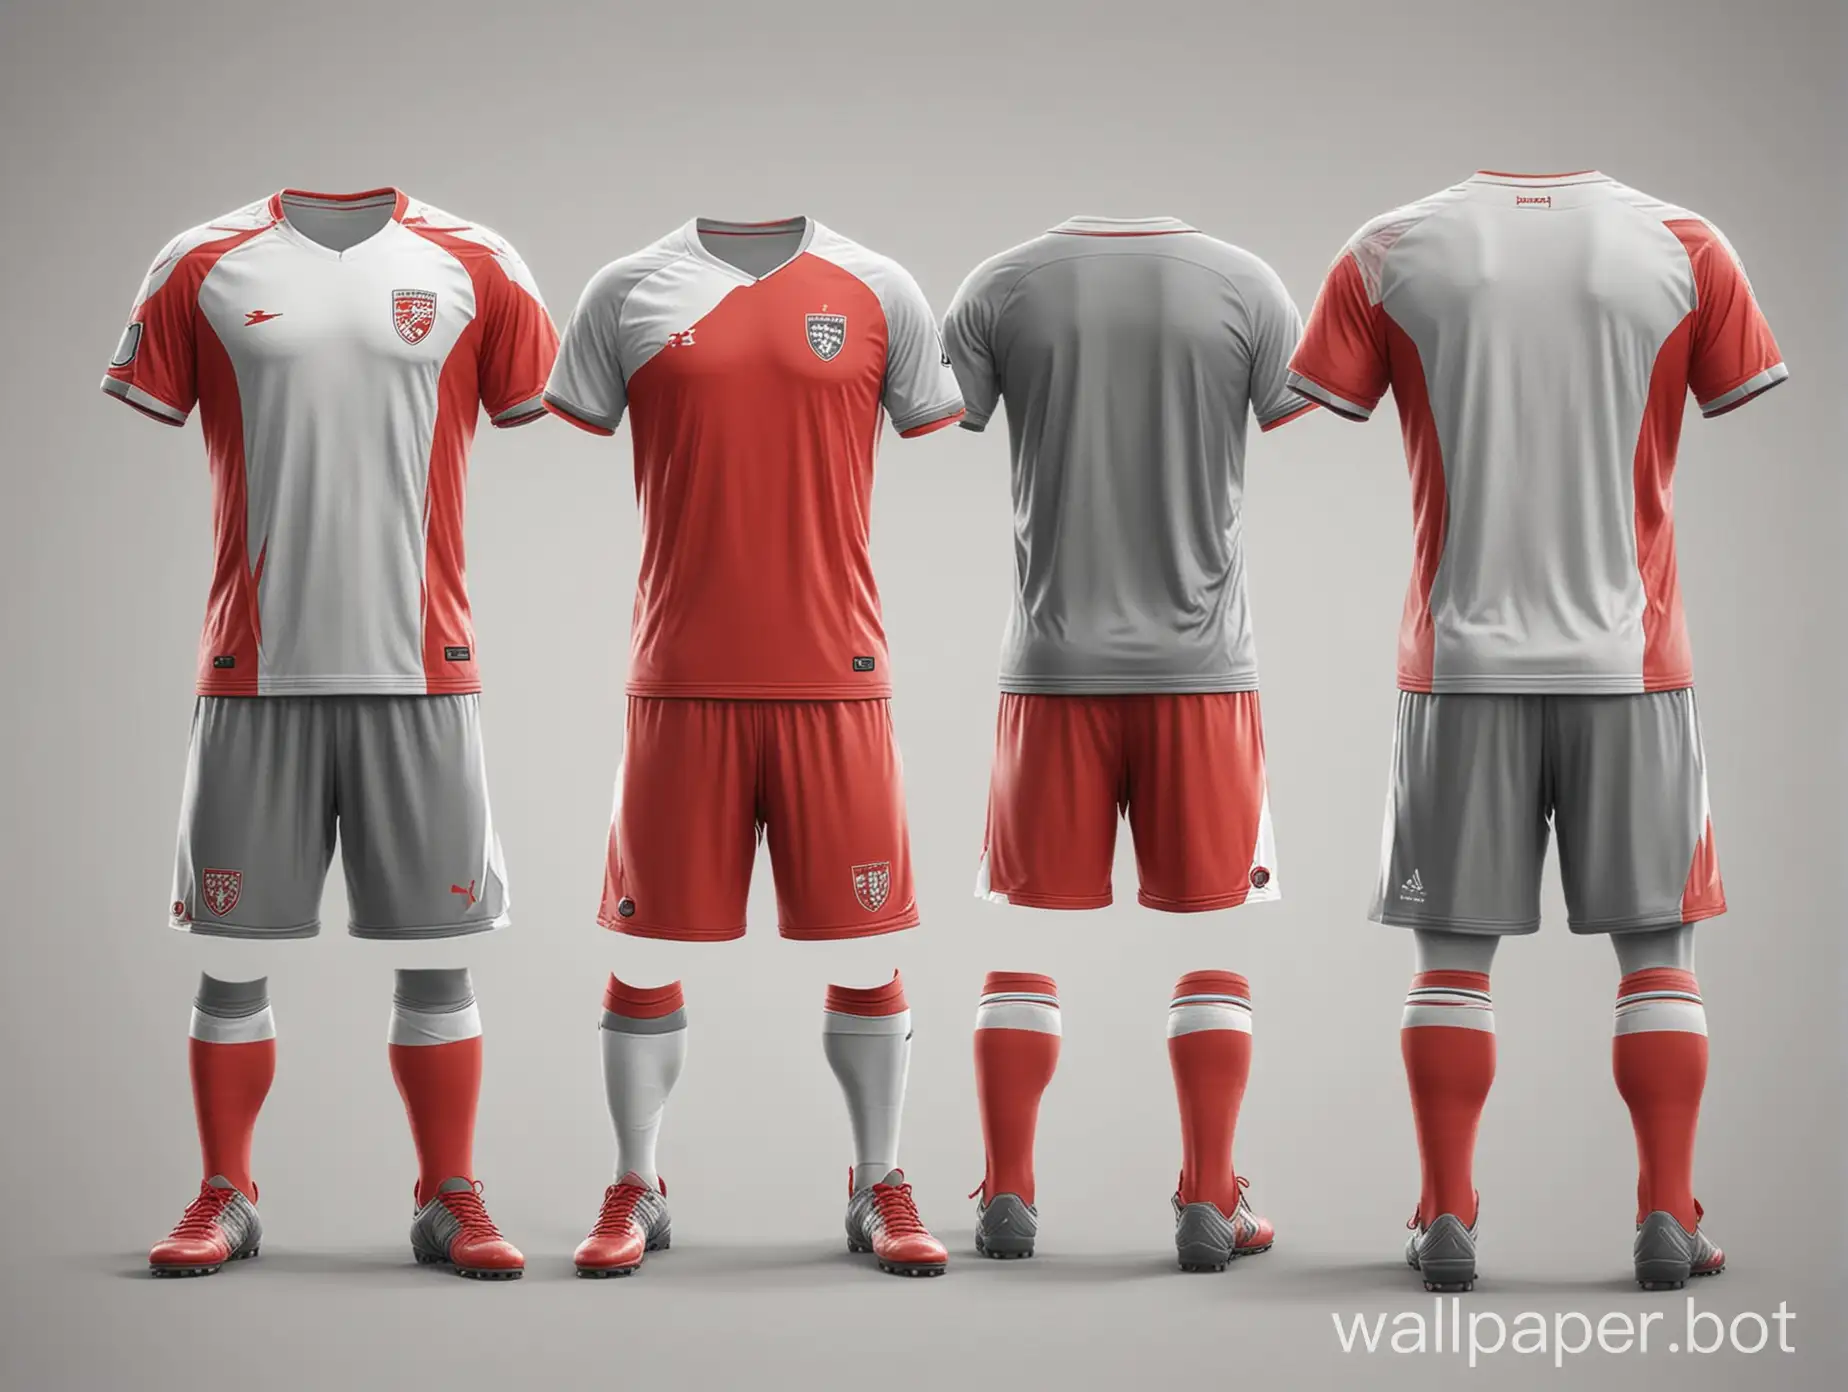 Symmetrical-Red-and-Gray-Soccer-Uniform-Sketch-on-White-Background